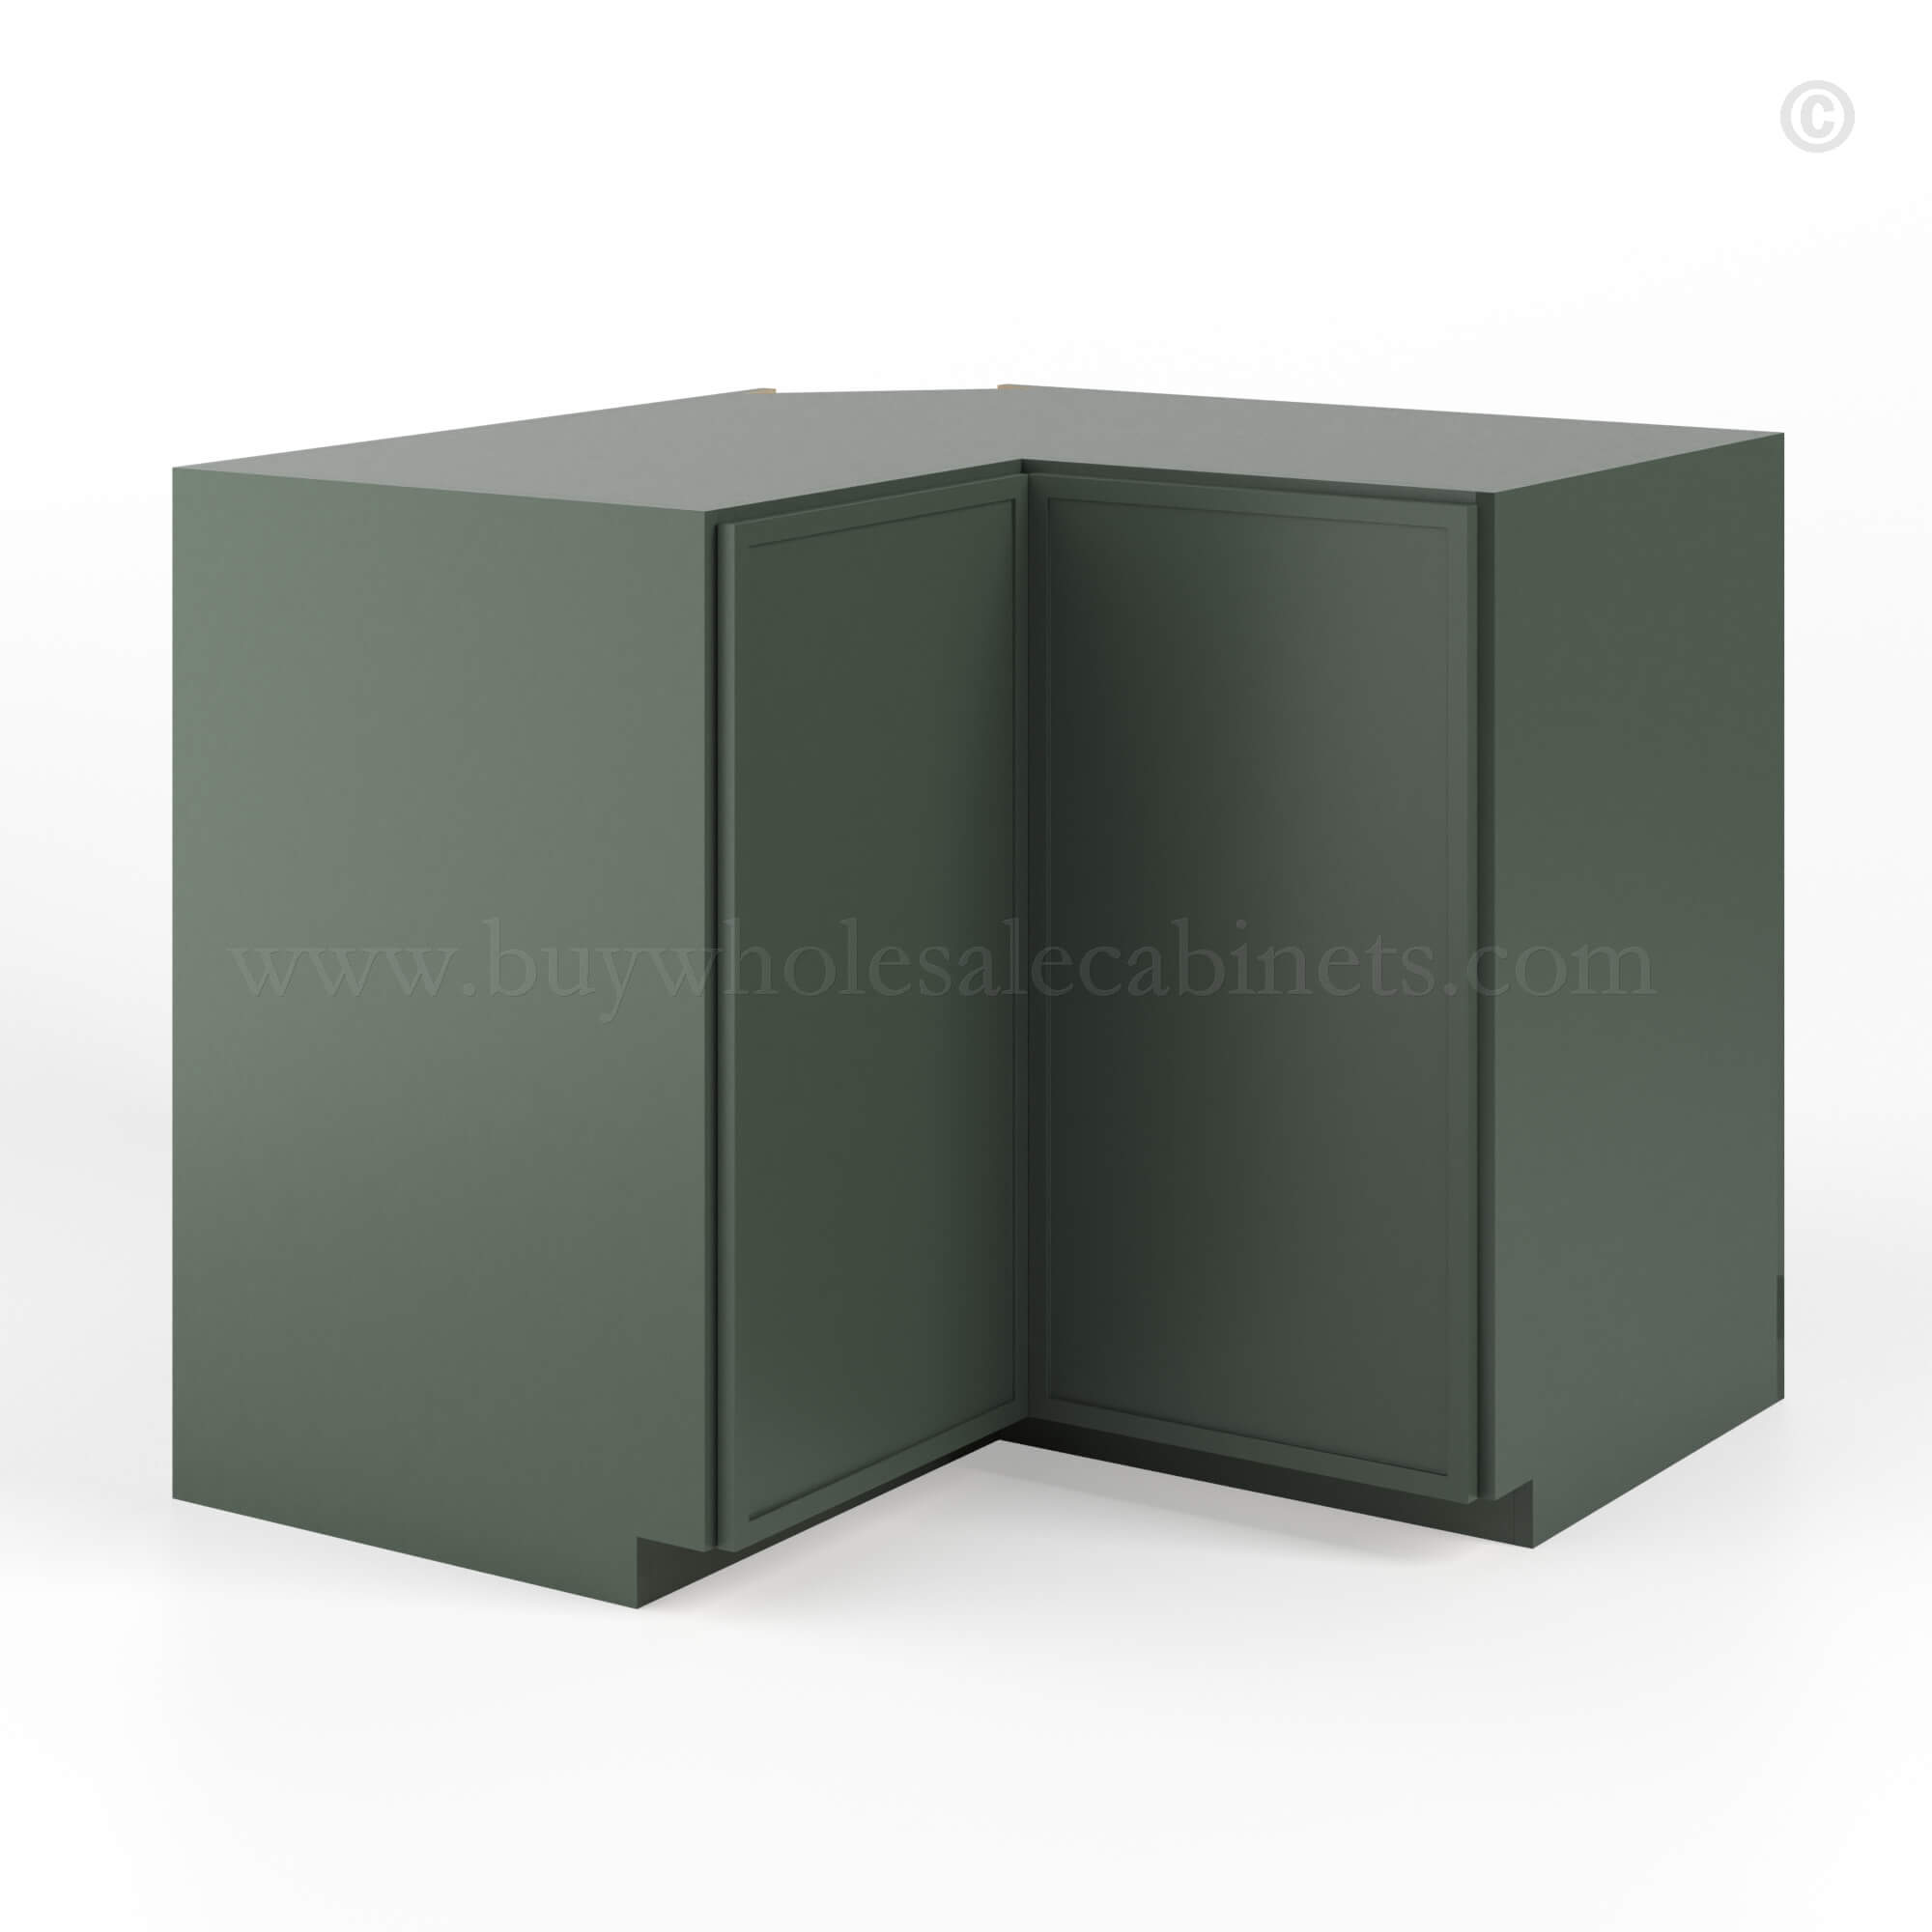 Slim Shaker Green Wall Easy Reach Cabinet, rta cabinets, wholesale cabinets